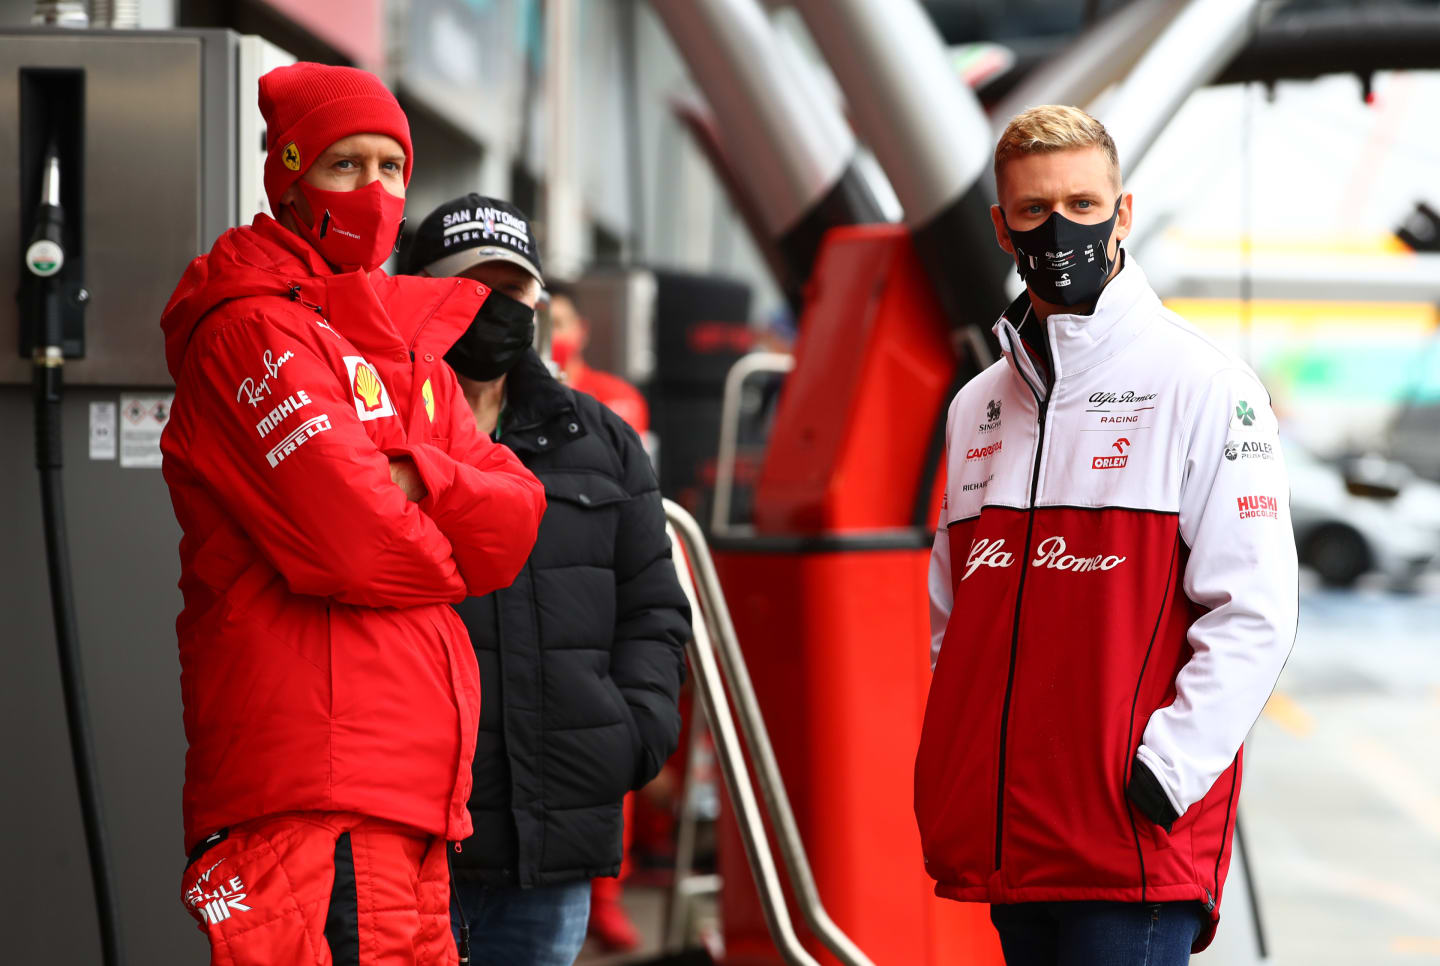 NUERBURG, GERMANY - OCTOBER 09: Sebastian Vettel of Germany and Ferrari and Mick Schumacher of Germany and Alfa Romeo Racing talk in the Pitlane during a weather delayed FP2 during practice ahead of the F1 Eifel Grand Prix at Nuerburgring on October 09, 2020 in Nuerburg, Germany. (Photo by Mark Thompson/Getty Images)